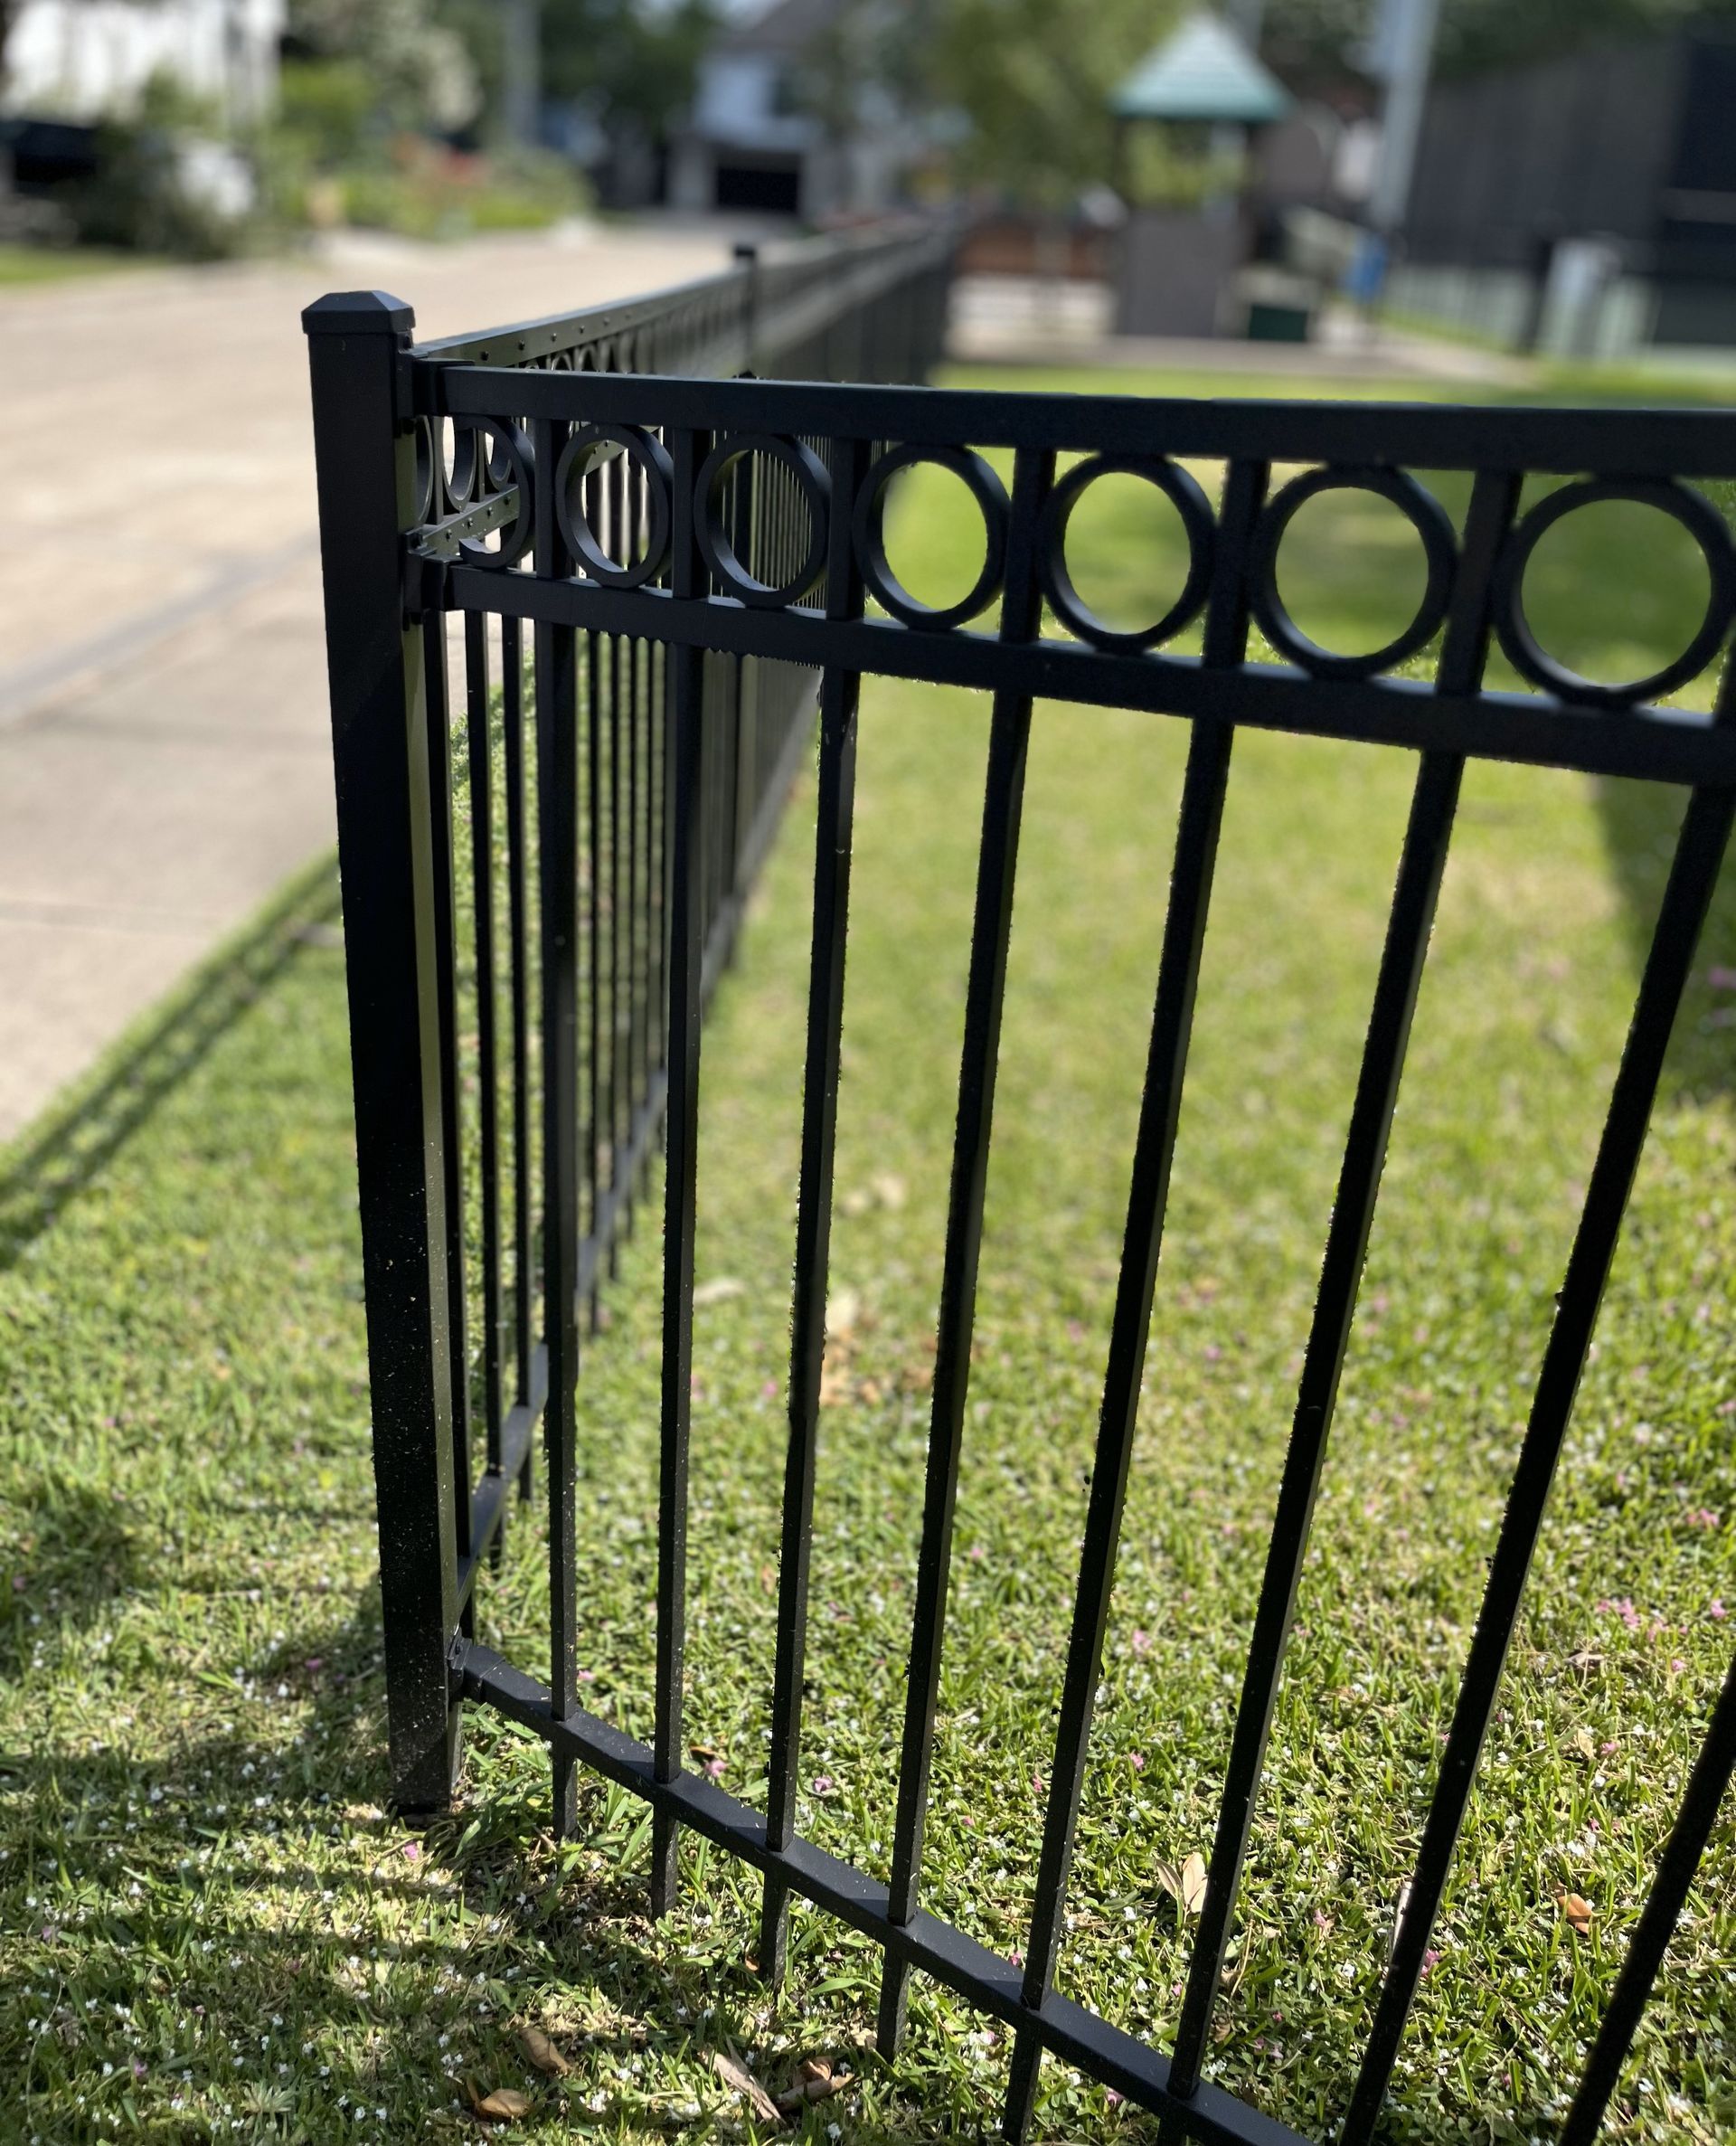 A wrought iron fence with decorative features at a home